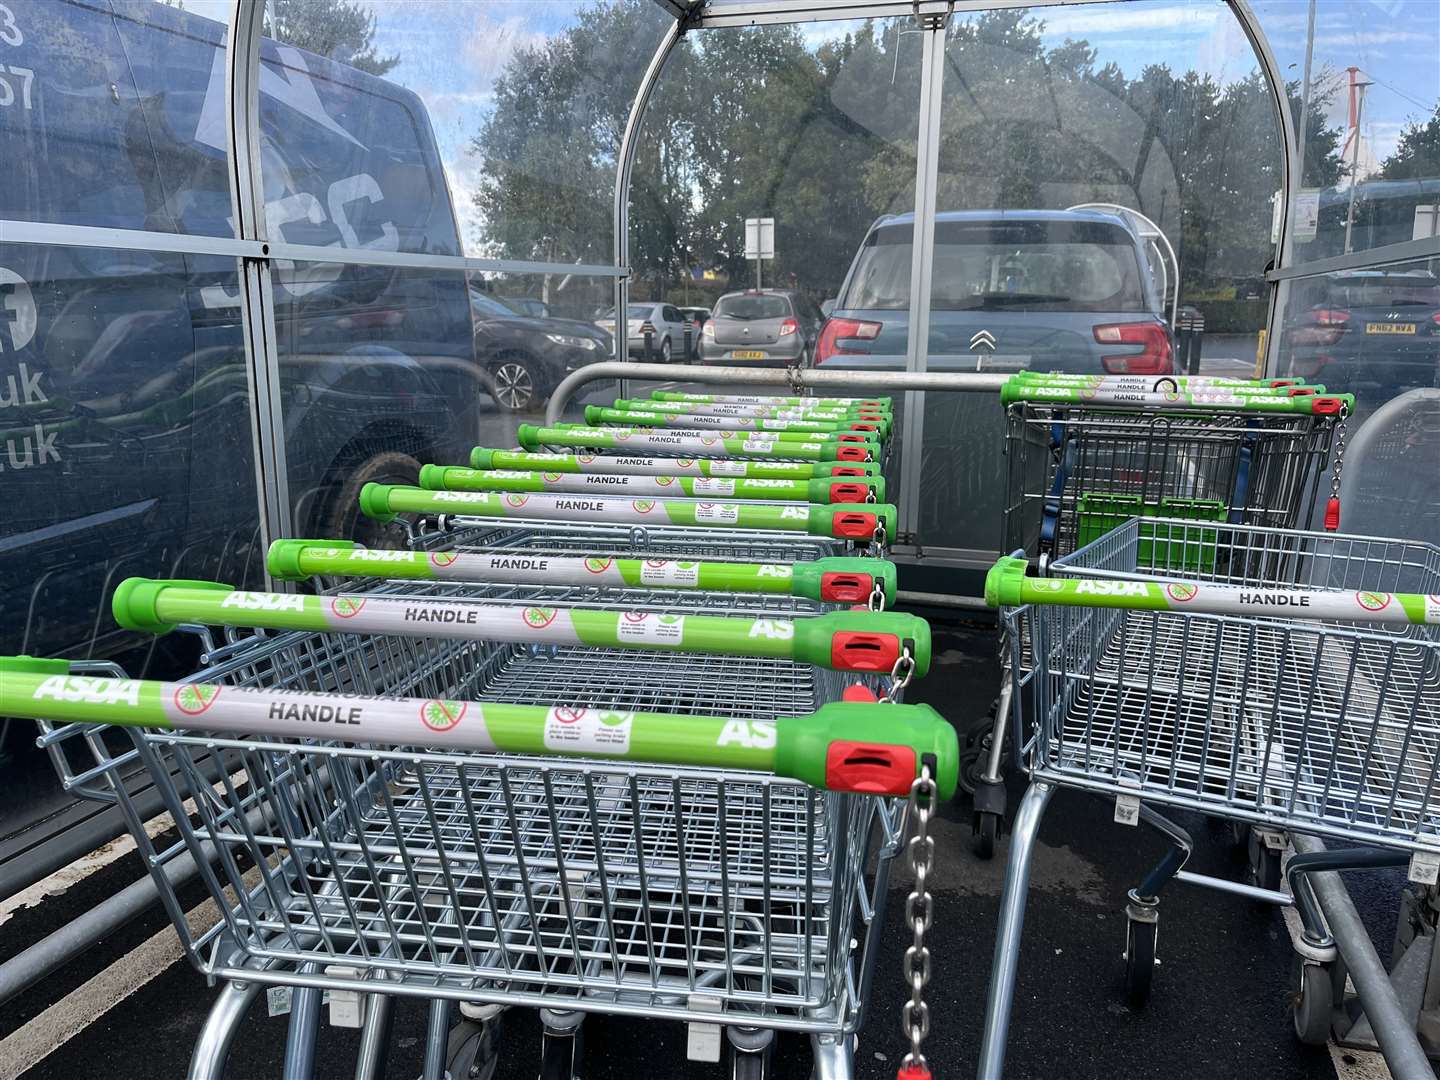 The new trolleys now have the £1 lock back on them